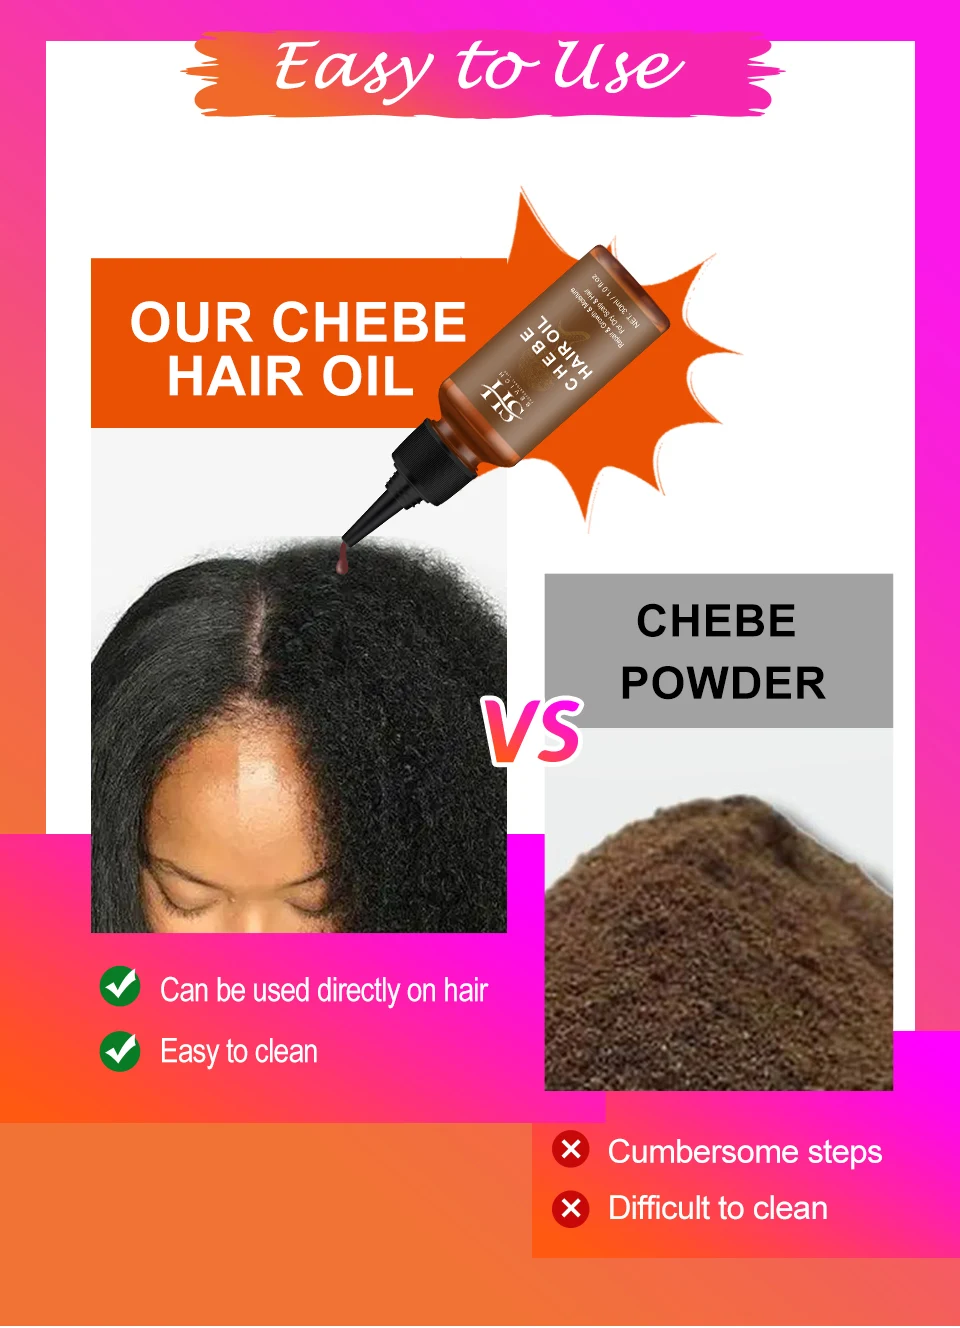 Africa Crazy Chebe Hair Growth Set  Fast Growing Hair Edges Beauty Hair Care Prevent Hair Loss Products Sevich images - 6